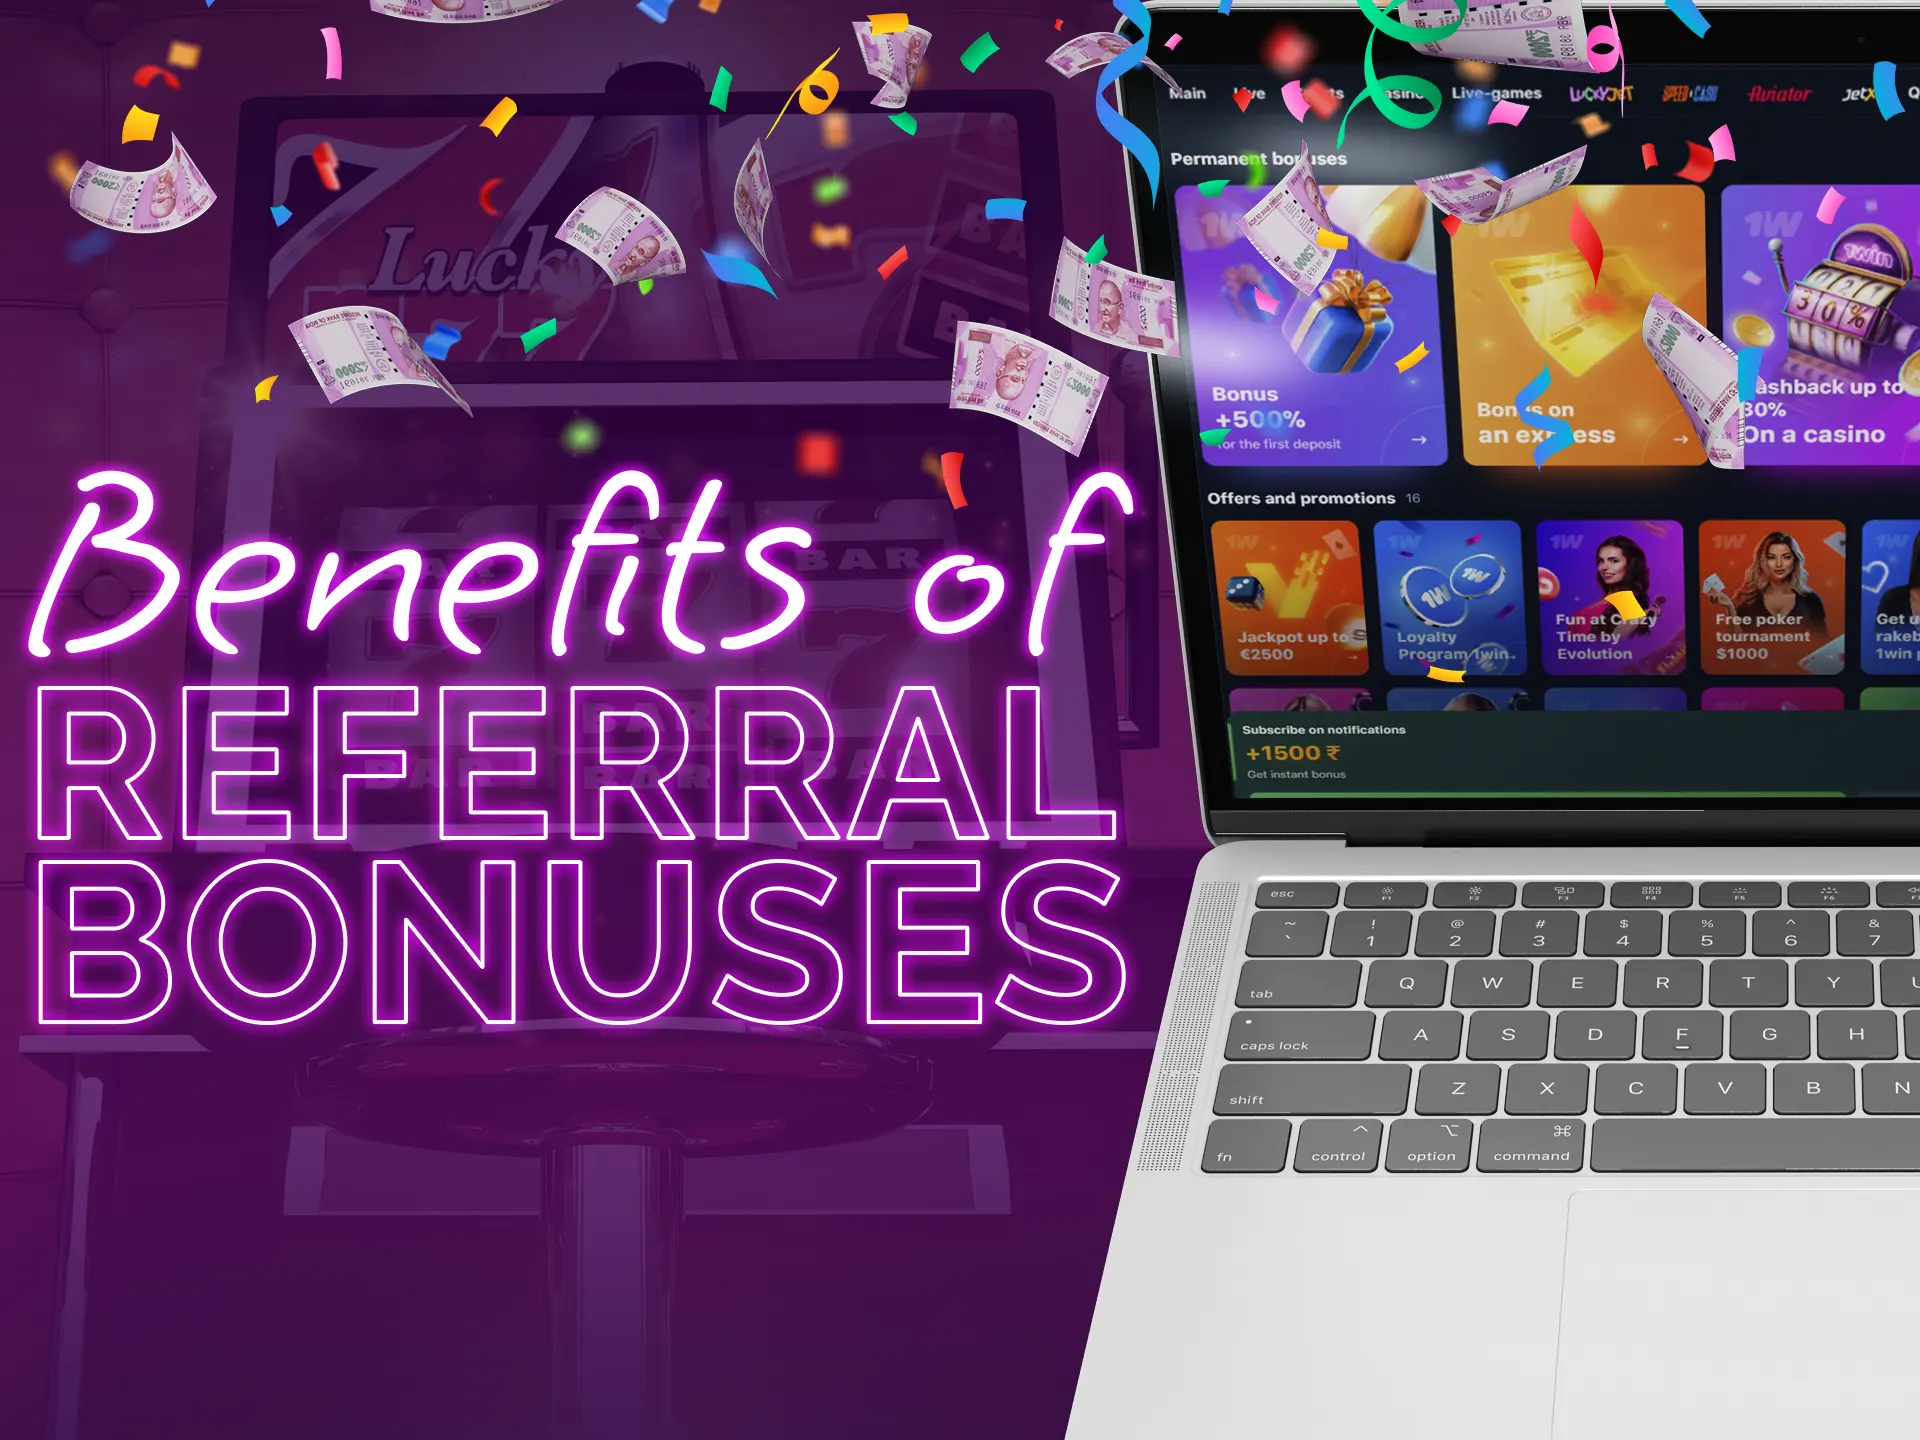 Learn the list of amazing benefits of referral bonuses!